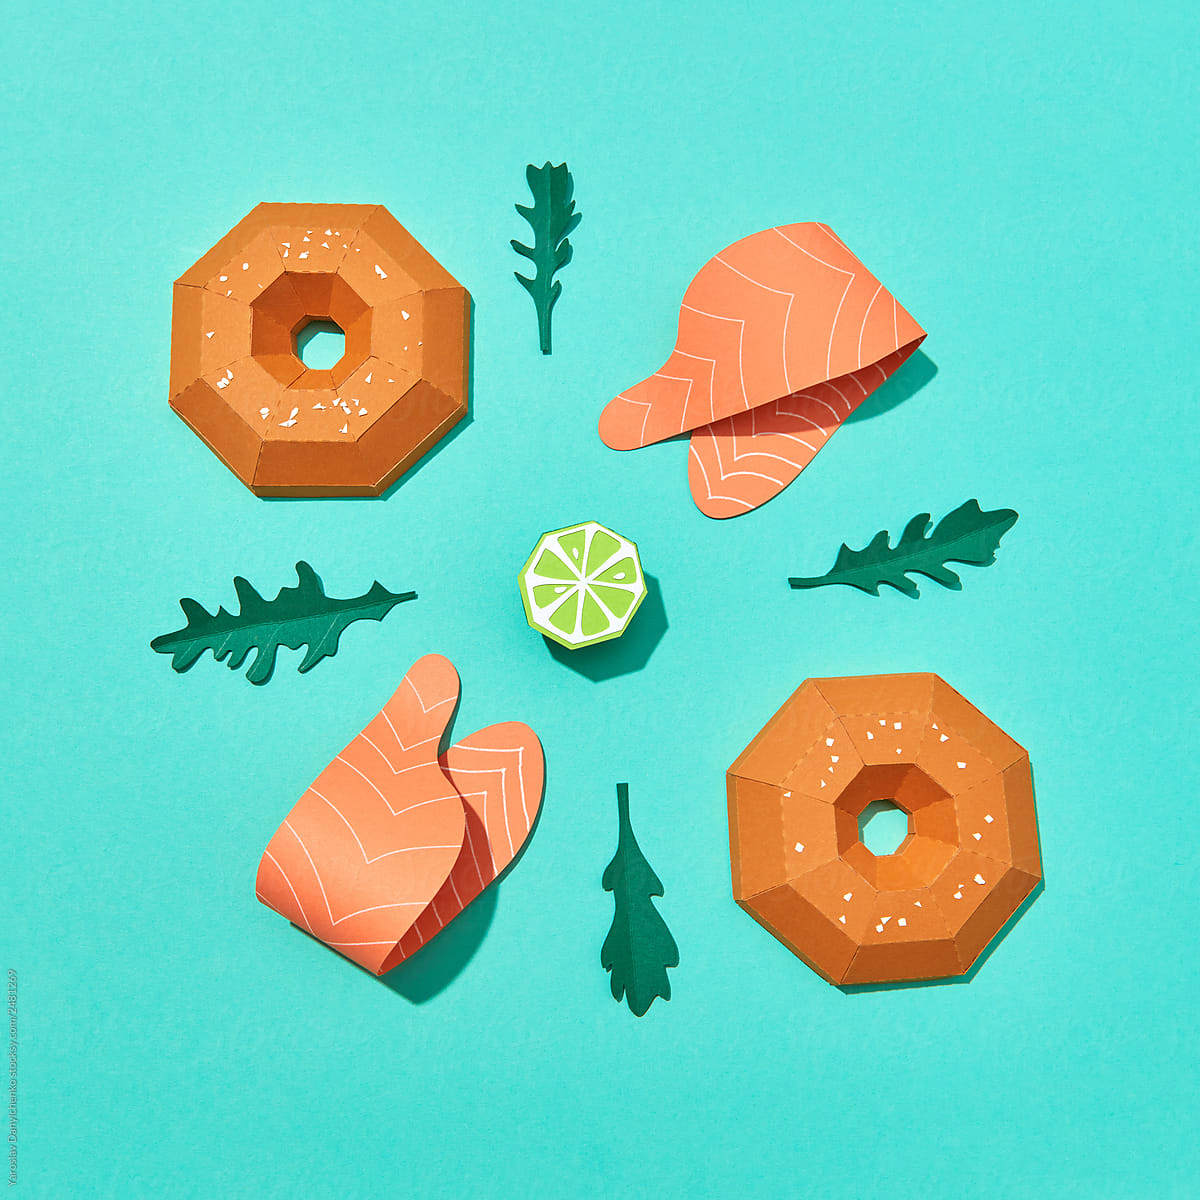 Handcraft paper half bagels, pieces of red fish, leaves and lime